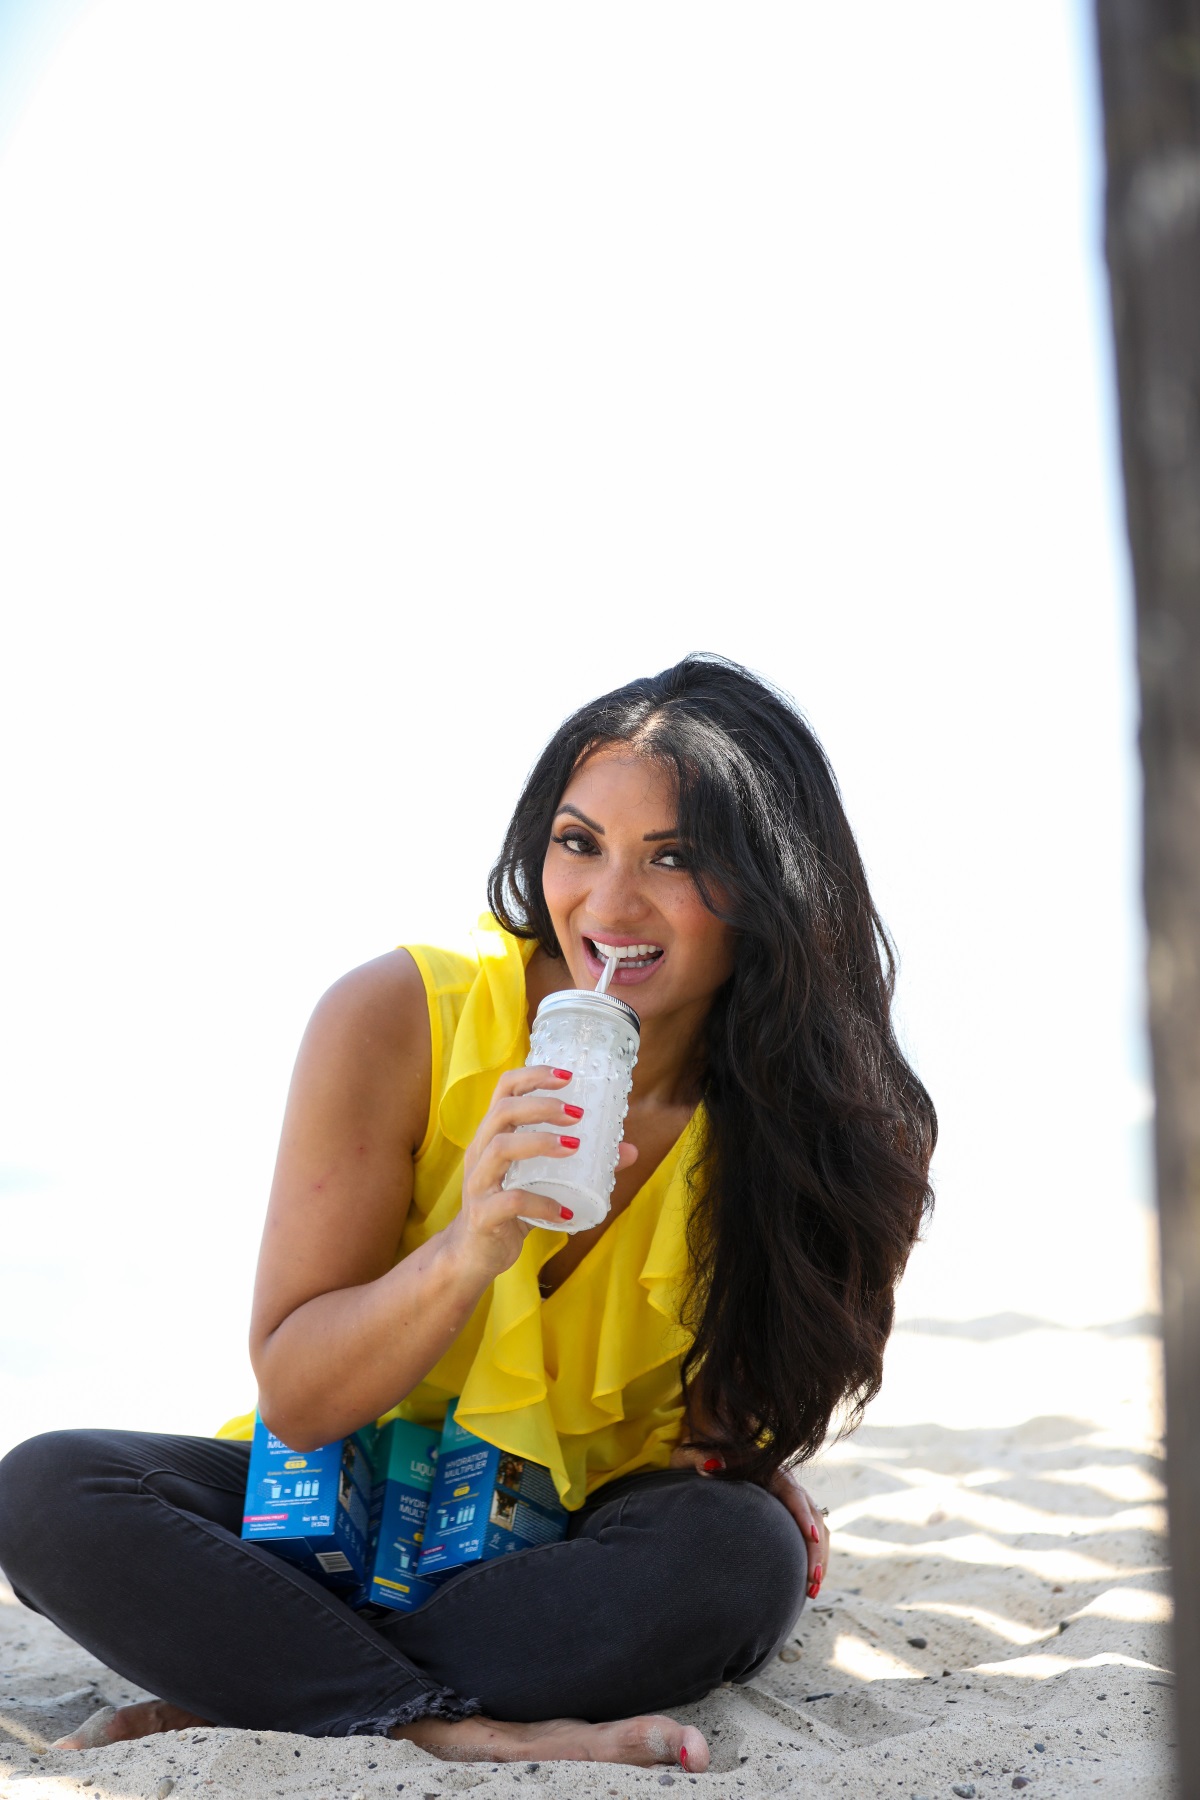 5 Benefits to Staying Hydrated | Liquid I.V. electrolyte drink mix | Orange County Fashion and Lifestyle Blog | Debbie Savage of To Thine Own Style Be True 